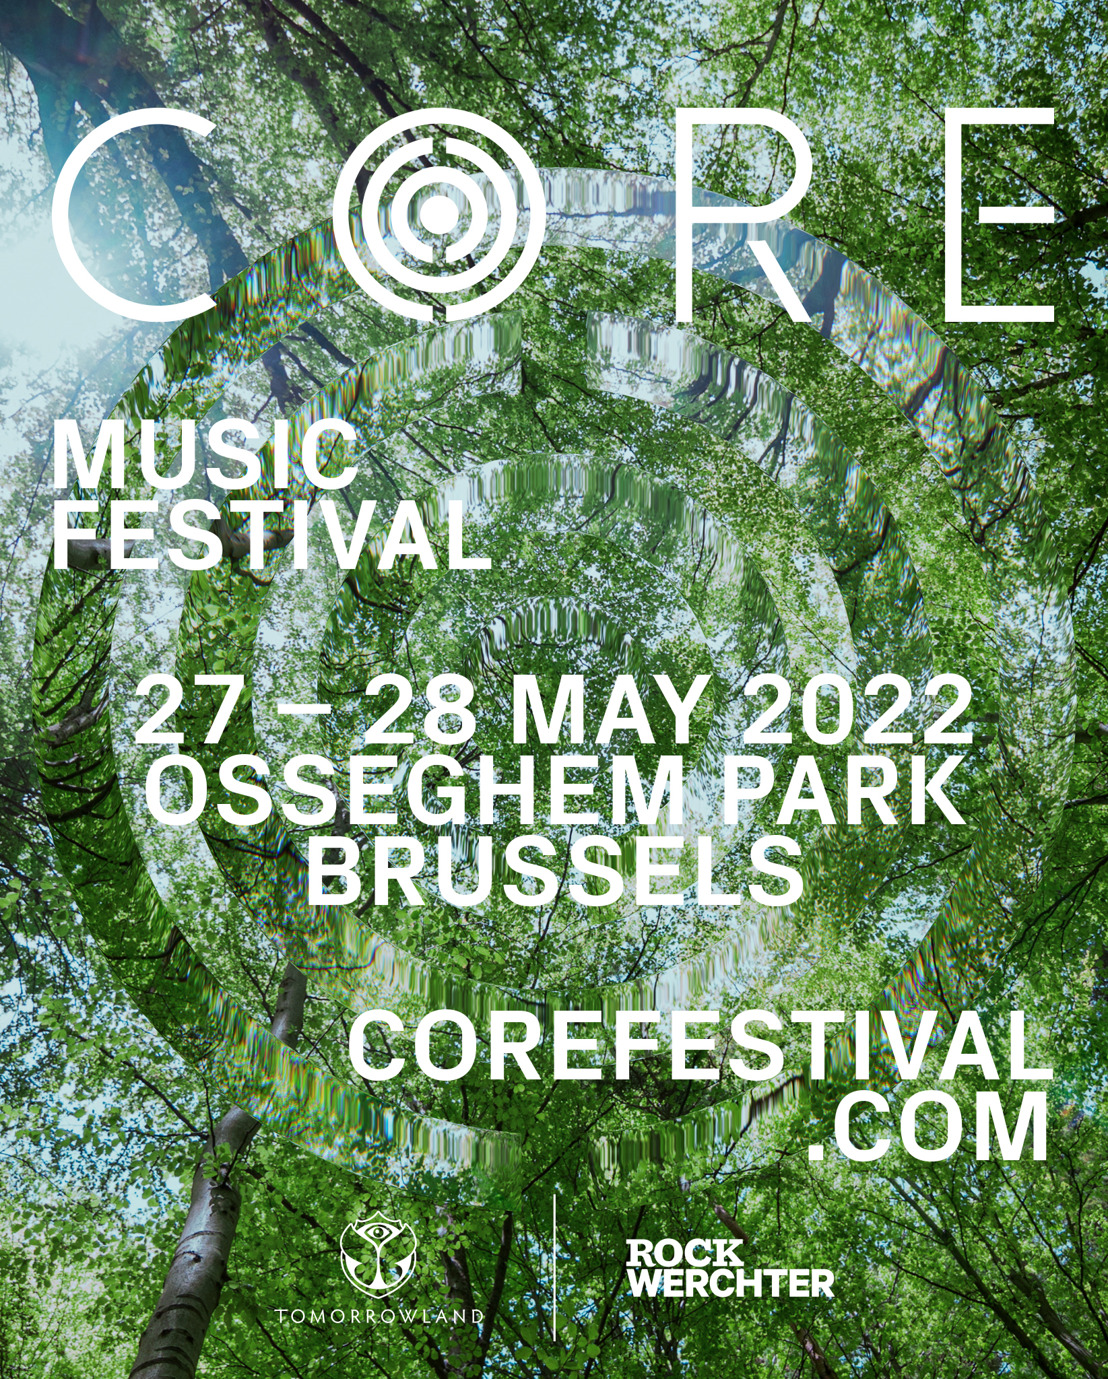 CORE Festival on 27 & 28 May in Brussels